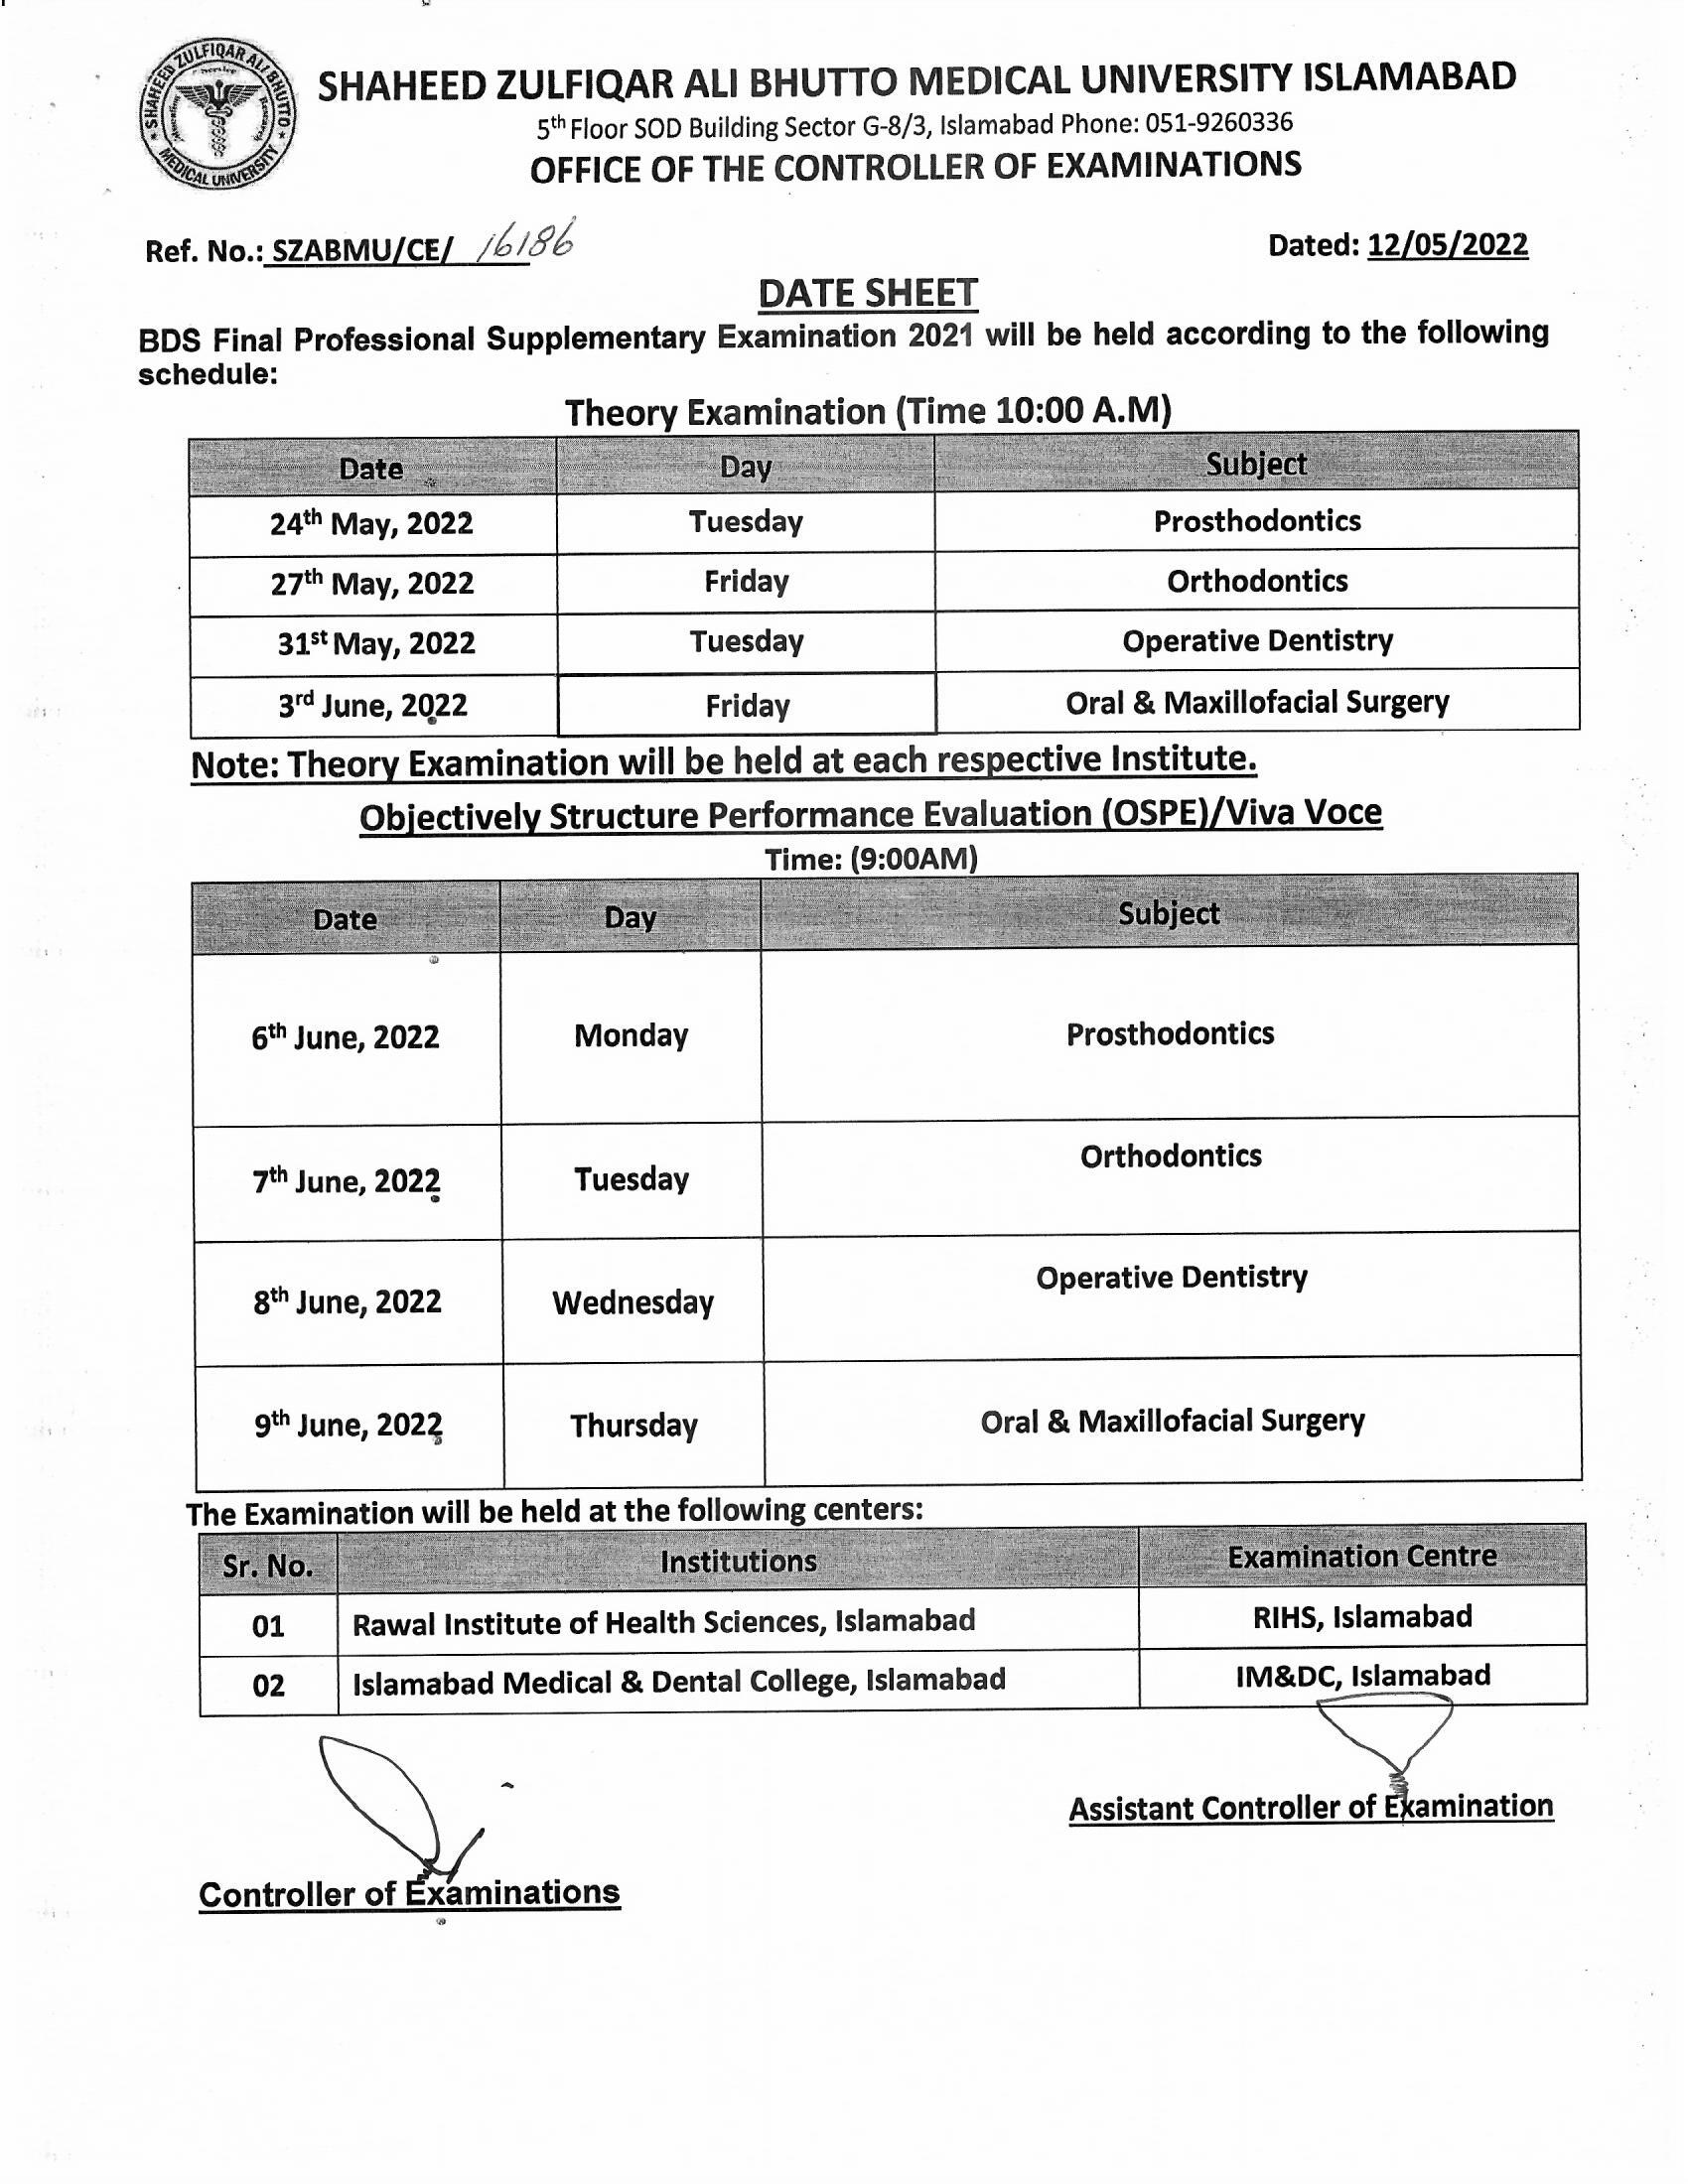 Date Sheet - BDS Supplementary Examinations 2021